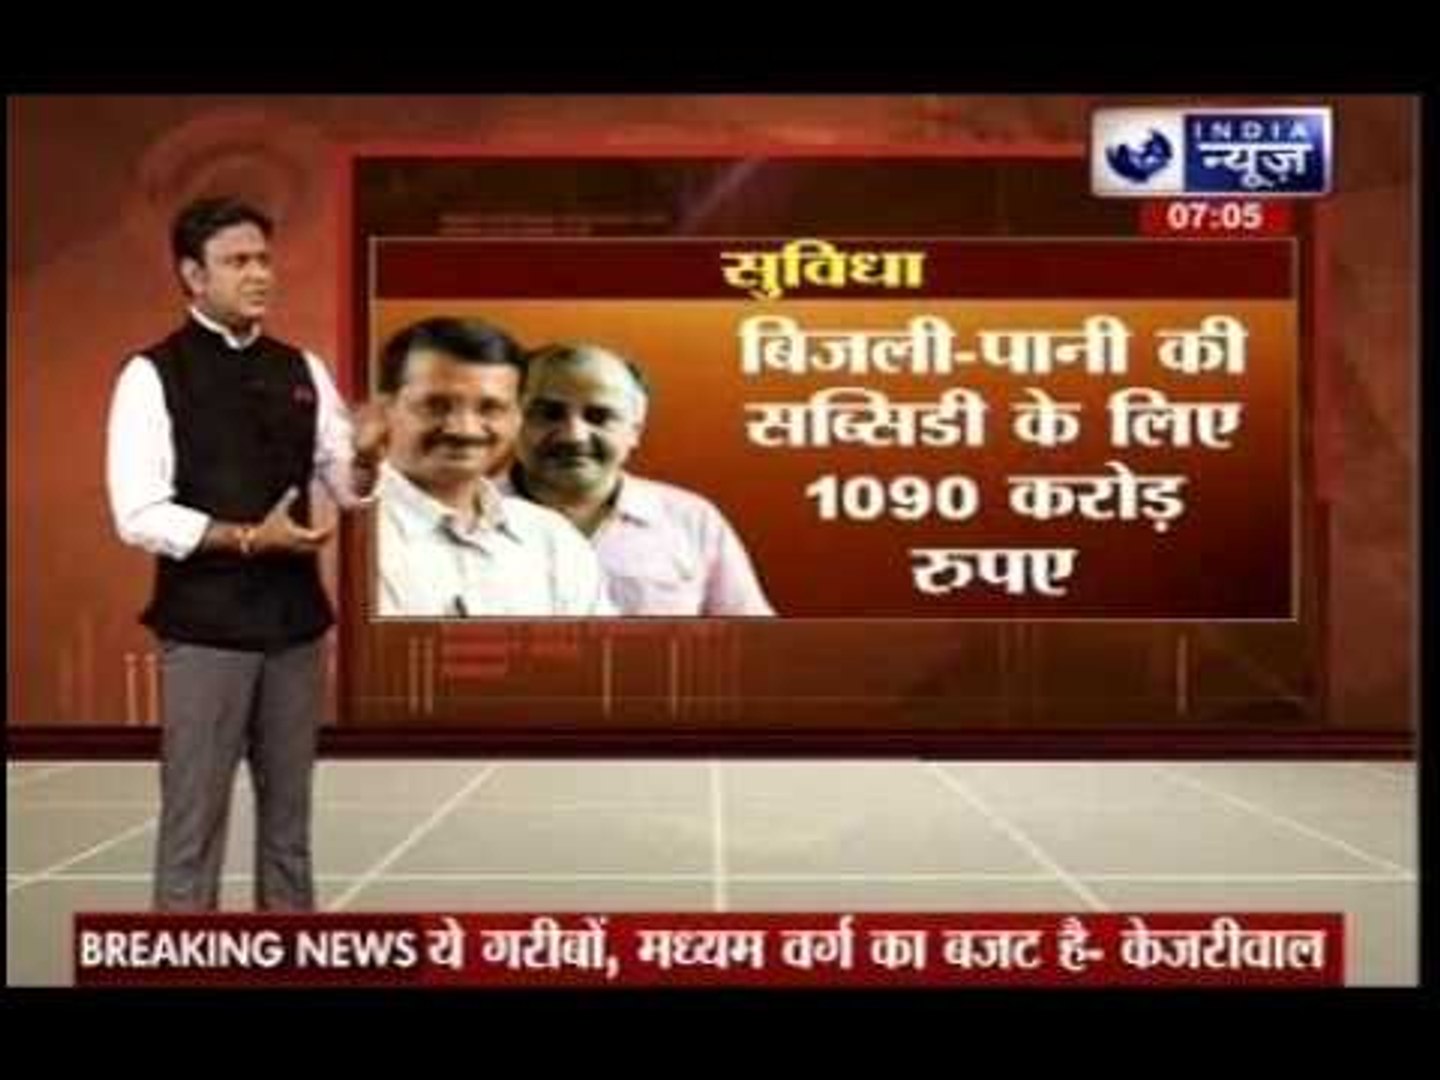 India News exclsuive show on 'AAP Ka Budget'